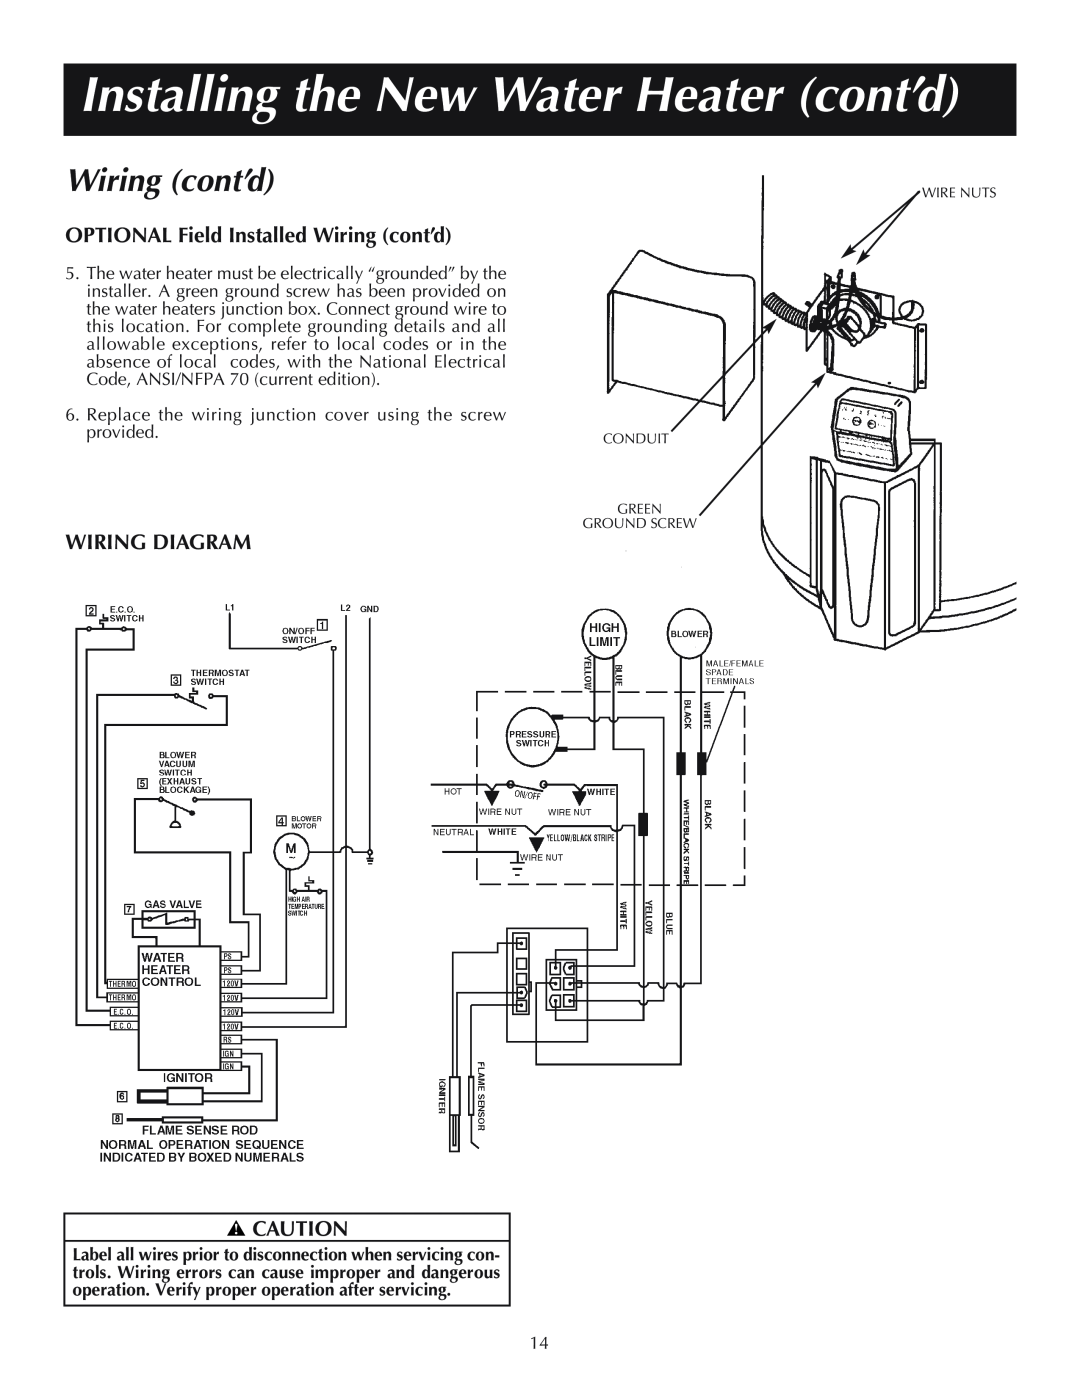 A.O. Smith Residential Power Vent Gas Water Heaters with Hot Surface Ignition Wiring cont’d, Wiring Diagram 